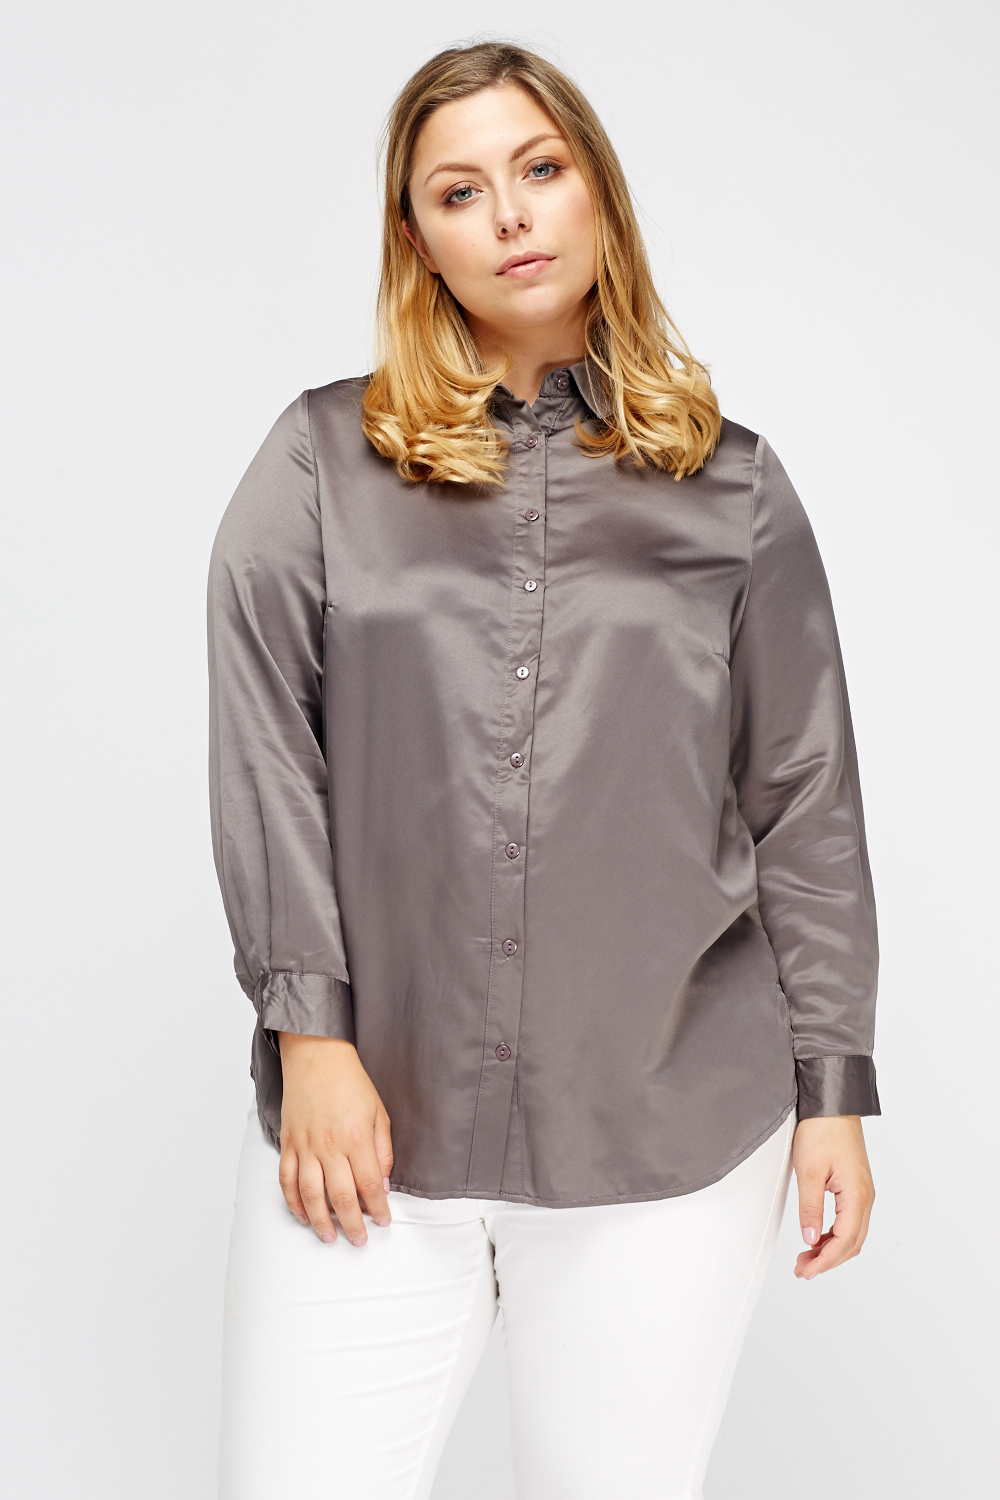 Embroidered Back Satin Blouse - Just $6